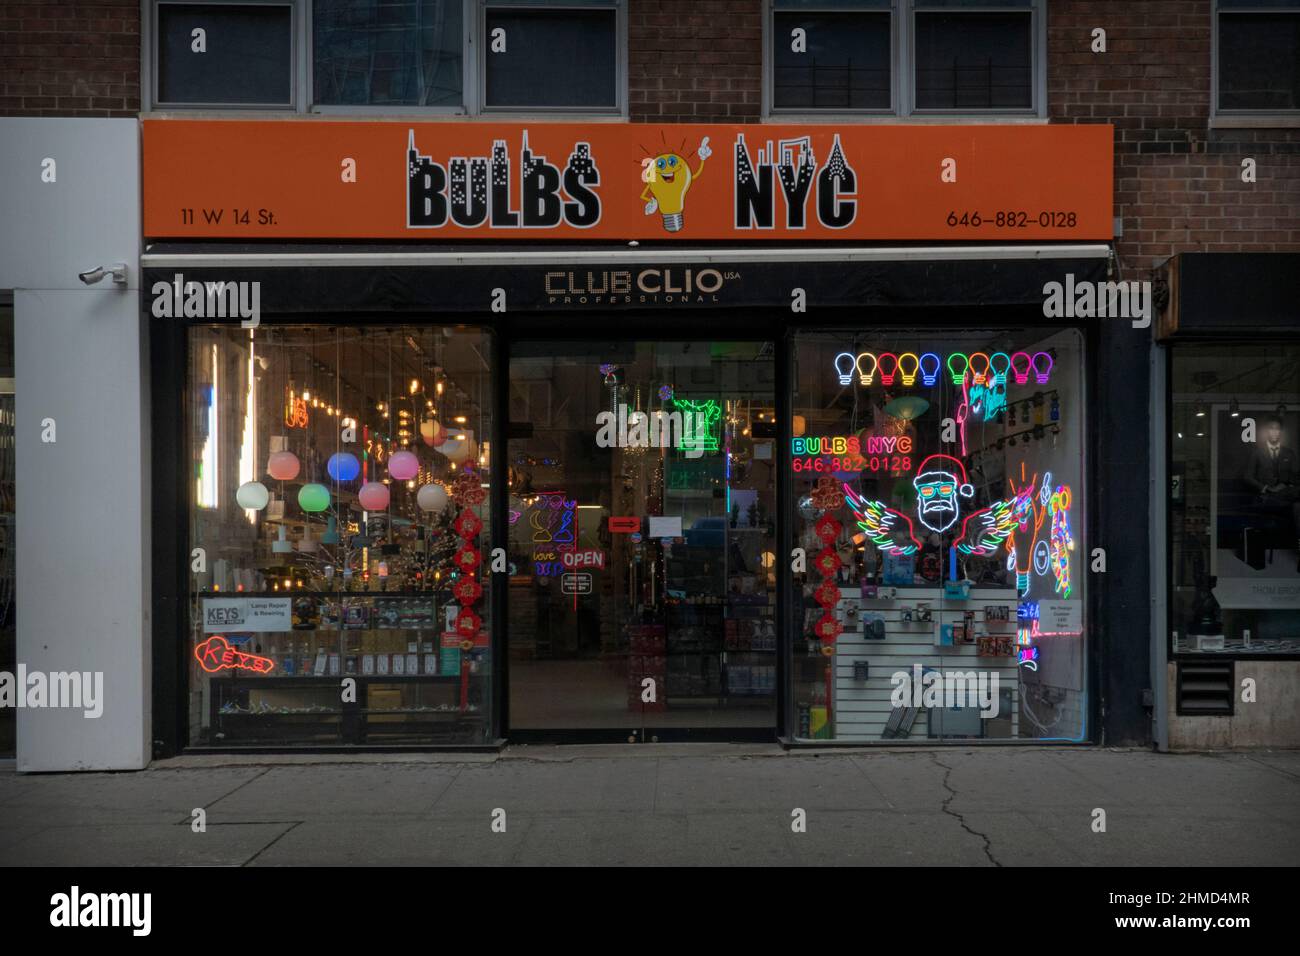 The exterior of Bulbs NYC a speciality lighting shop on West 14th Street in lower manhattan. Stock Photo